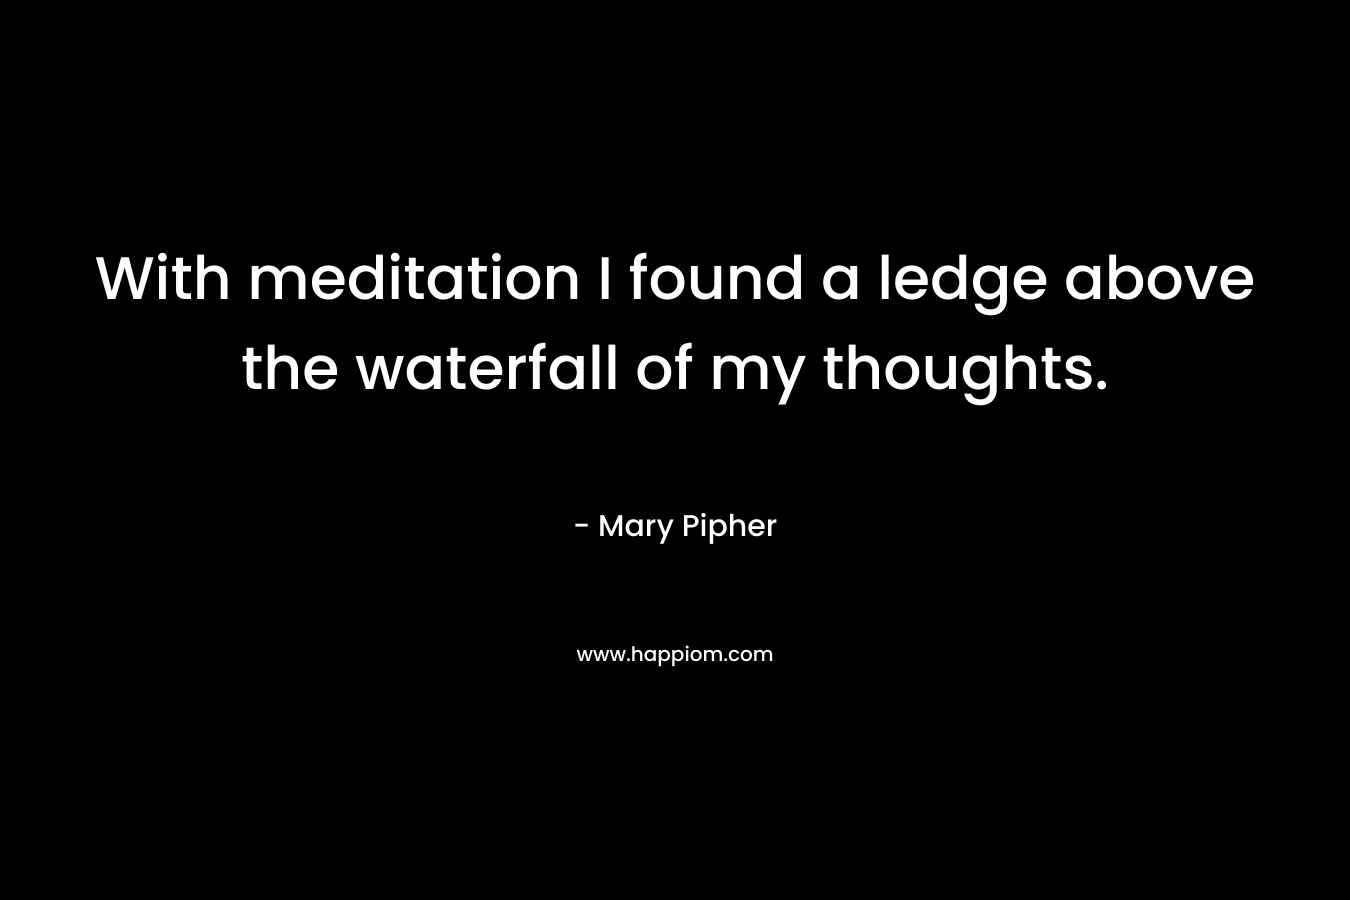 With meditation I found a ledge above the waterfall of my thoughts.